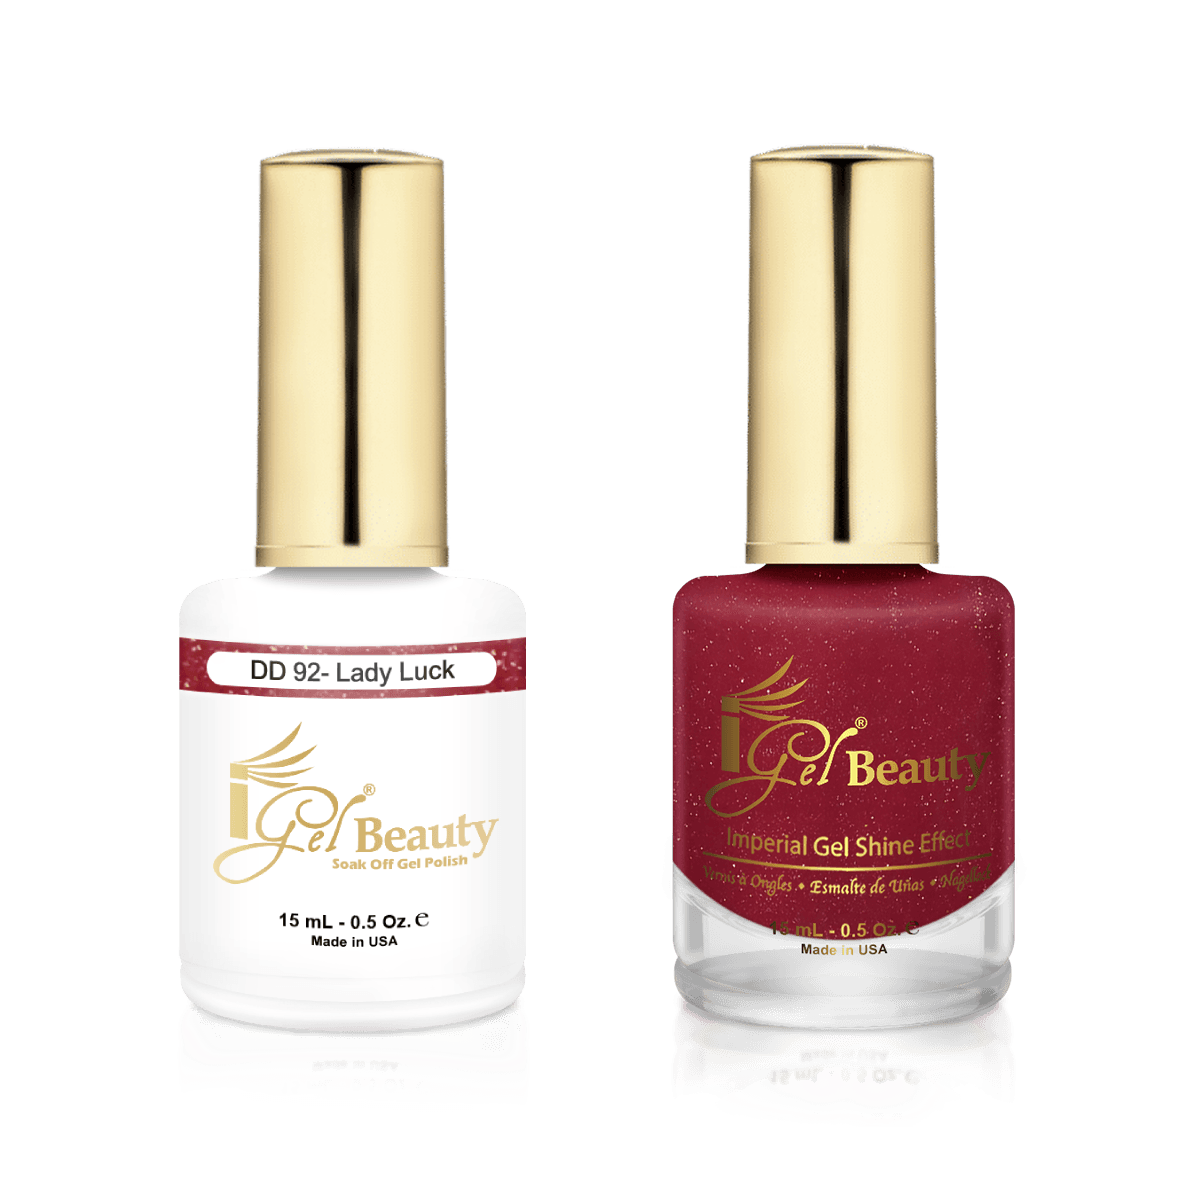 IGel Duo Gel Polish + Matching Nail Lacquer DD 92 LADY LUCK